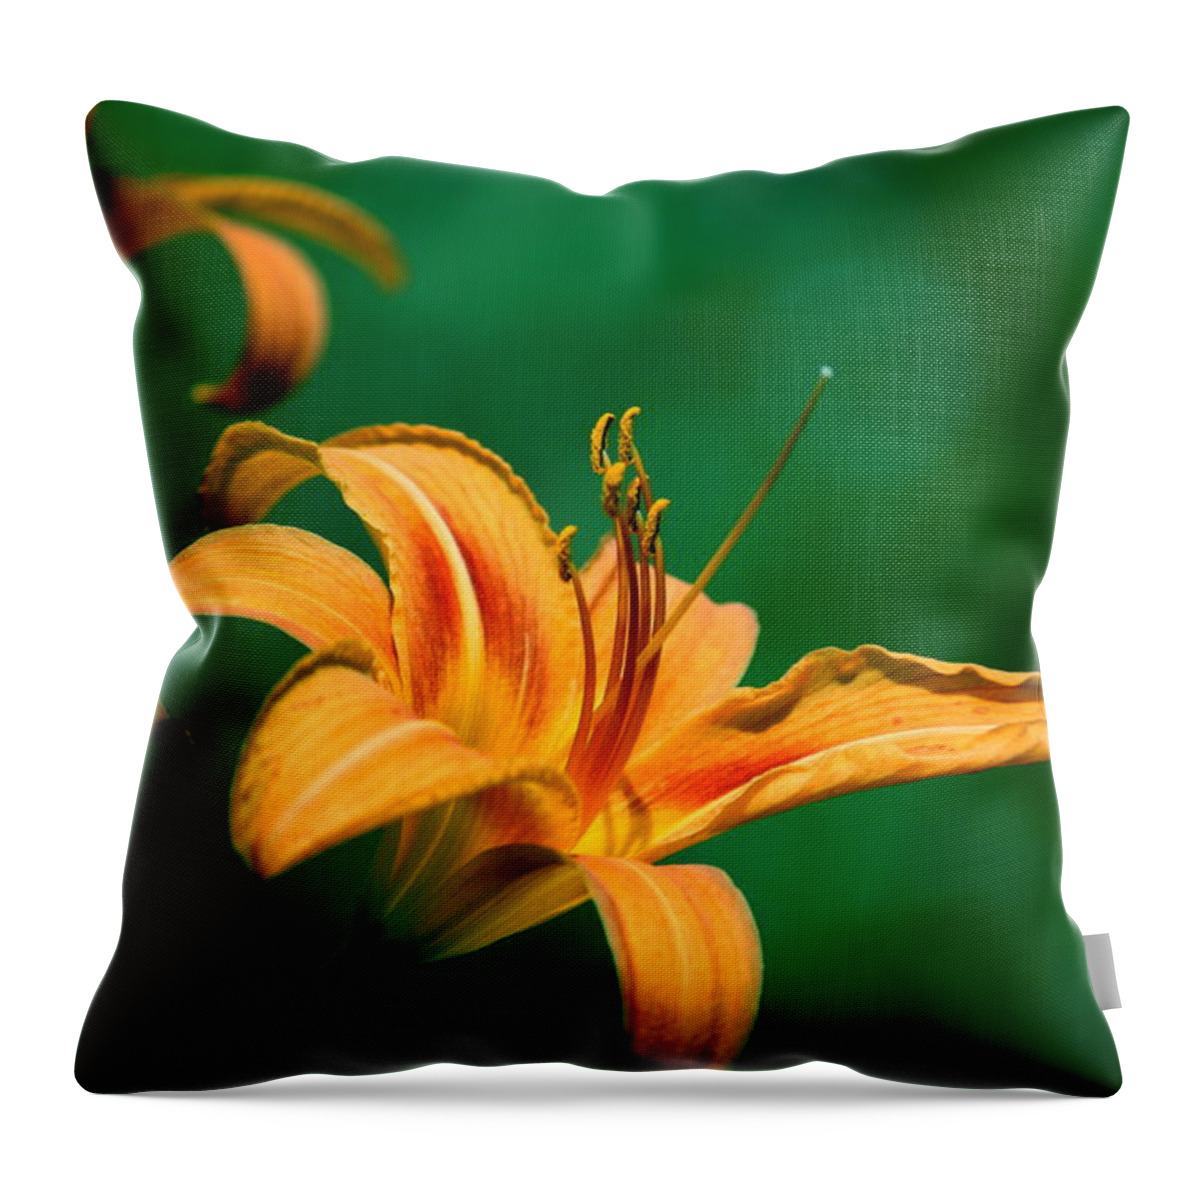 Spider Throw Pillow featuring the photograph Spider Lily 3 by Cathy Harper